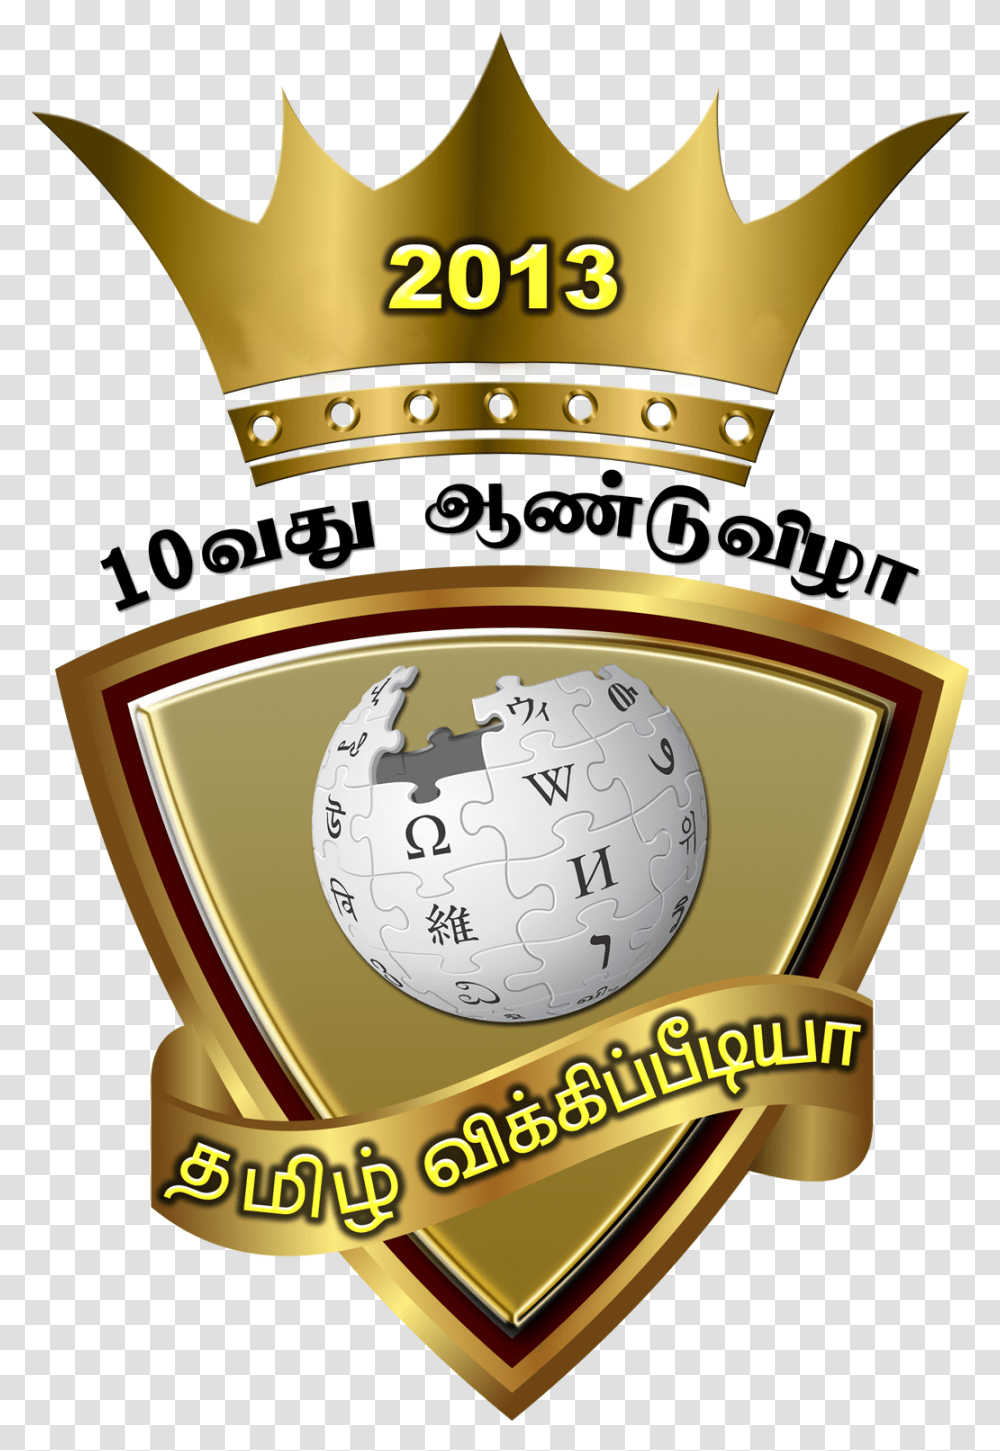 Tamil Wiki 10th Anniversary 1 Campanha Do Agasalho 2013, Trophy, Clock Tower, Building Transparent Png